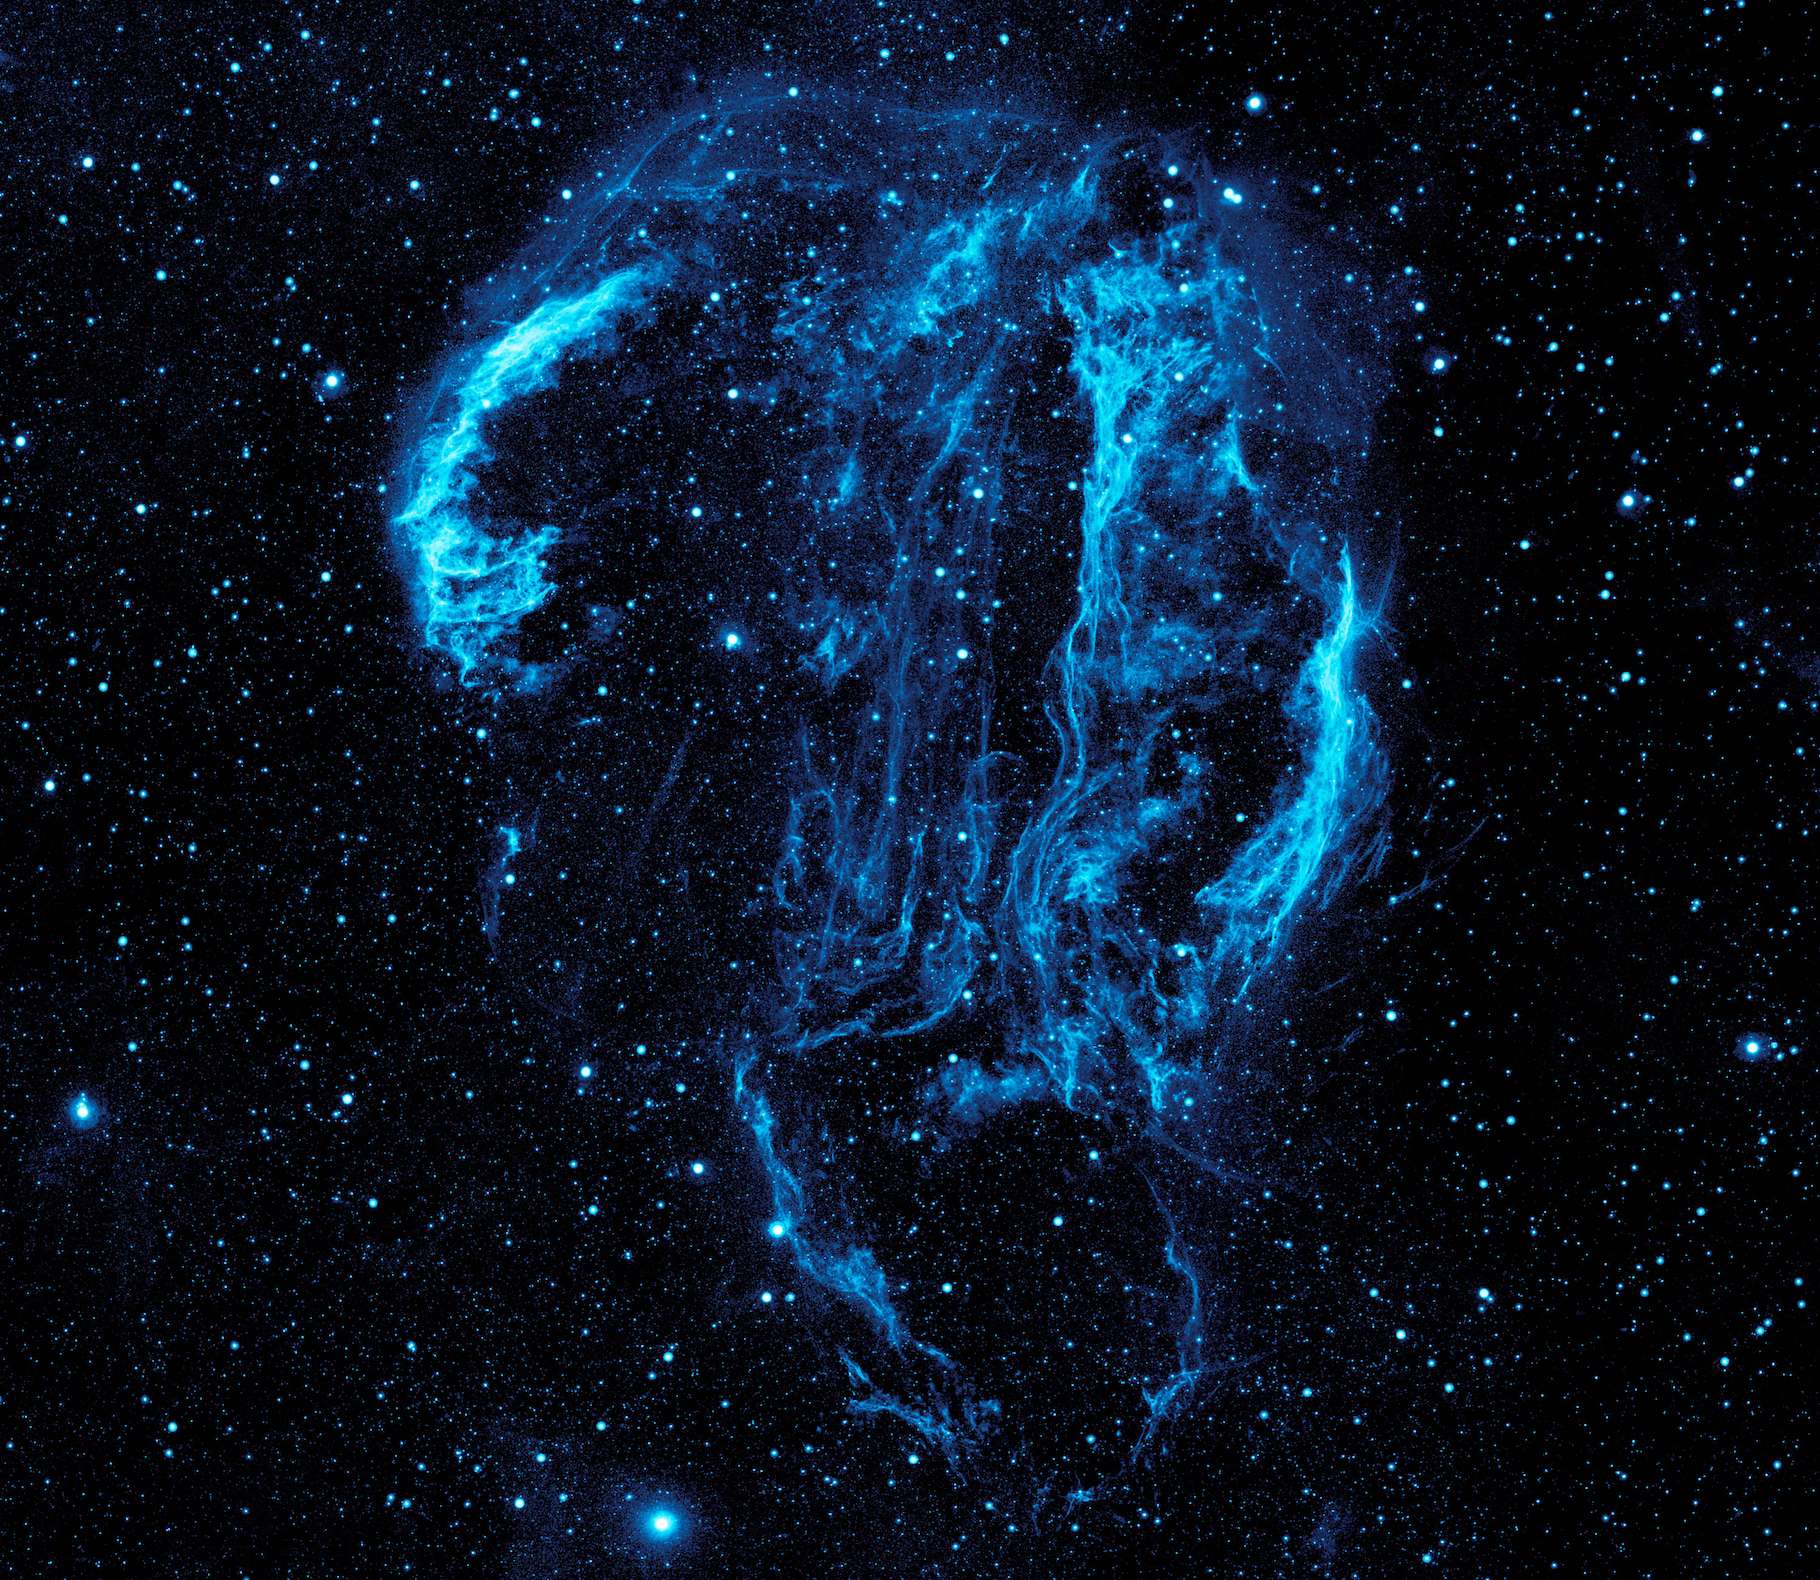 Enjoy the expansion of the supernova remnant that Hubble has imaged for 20 years